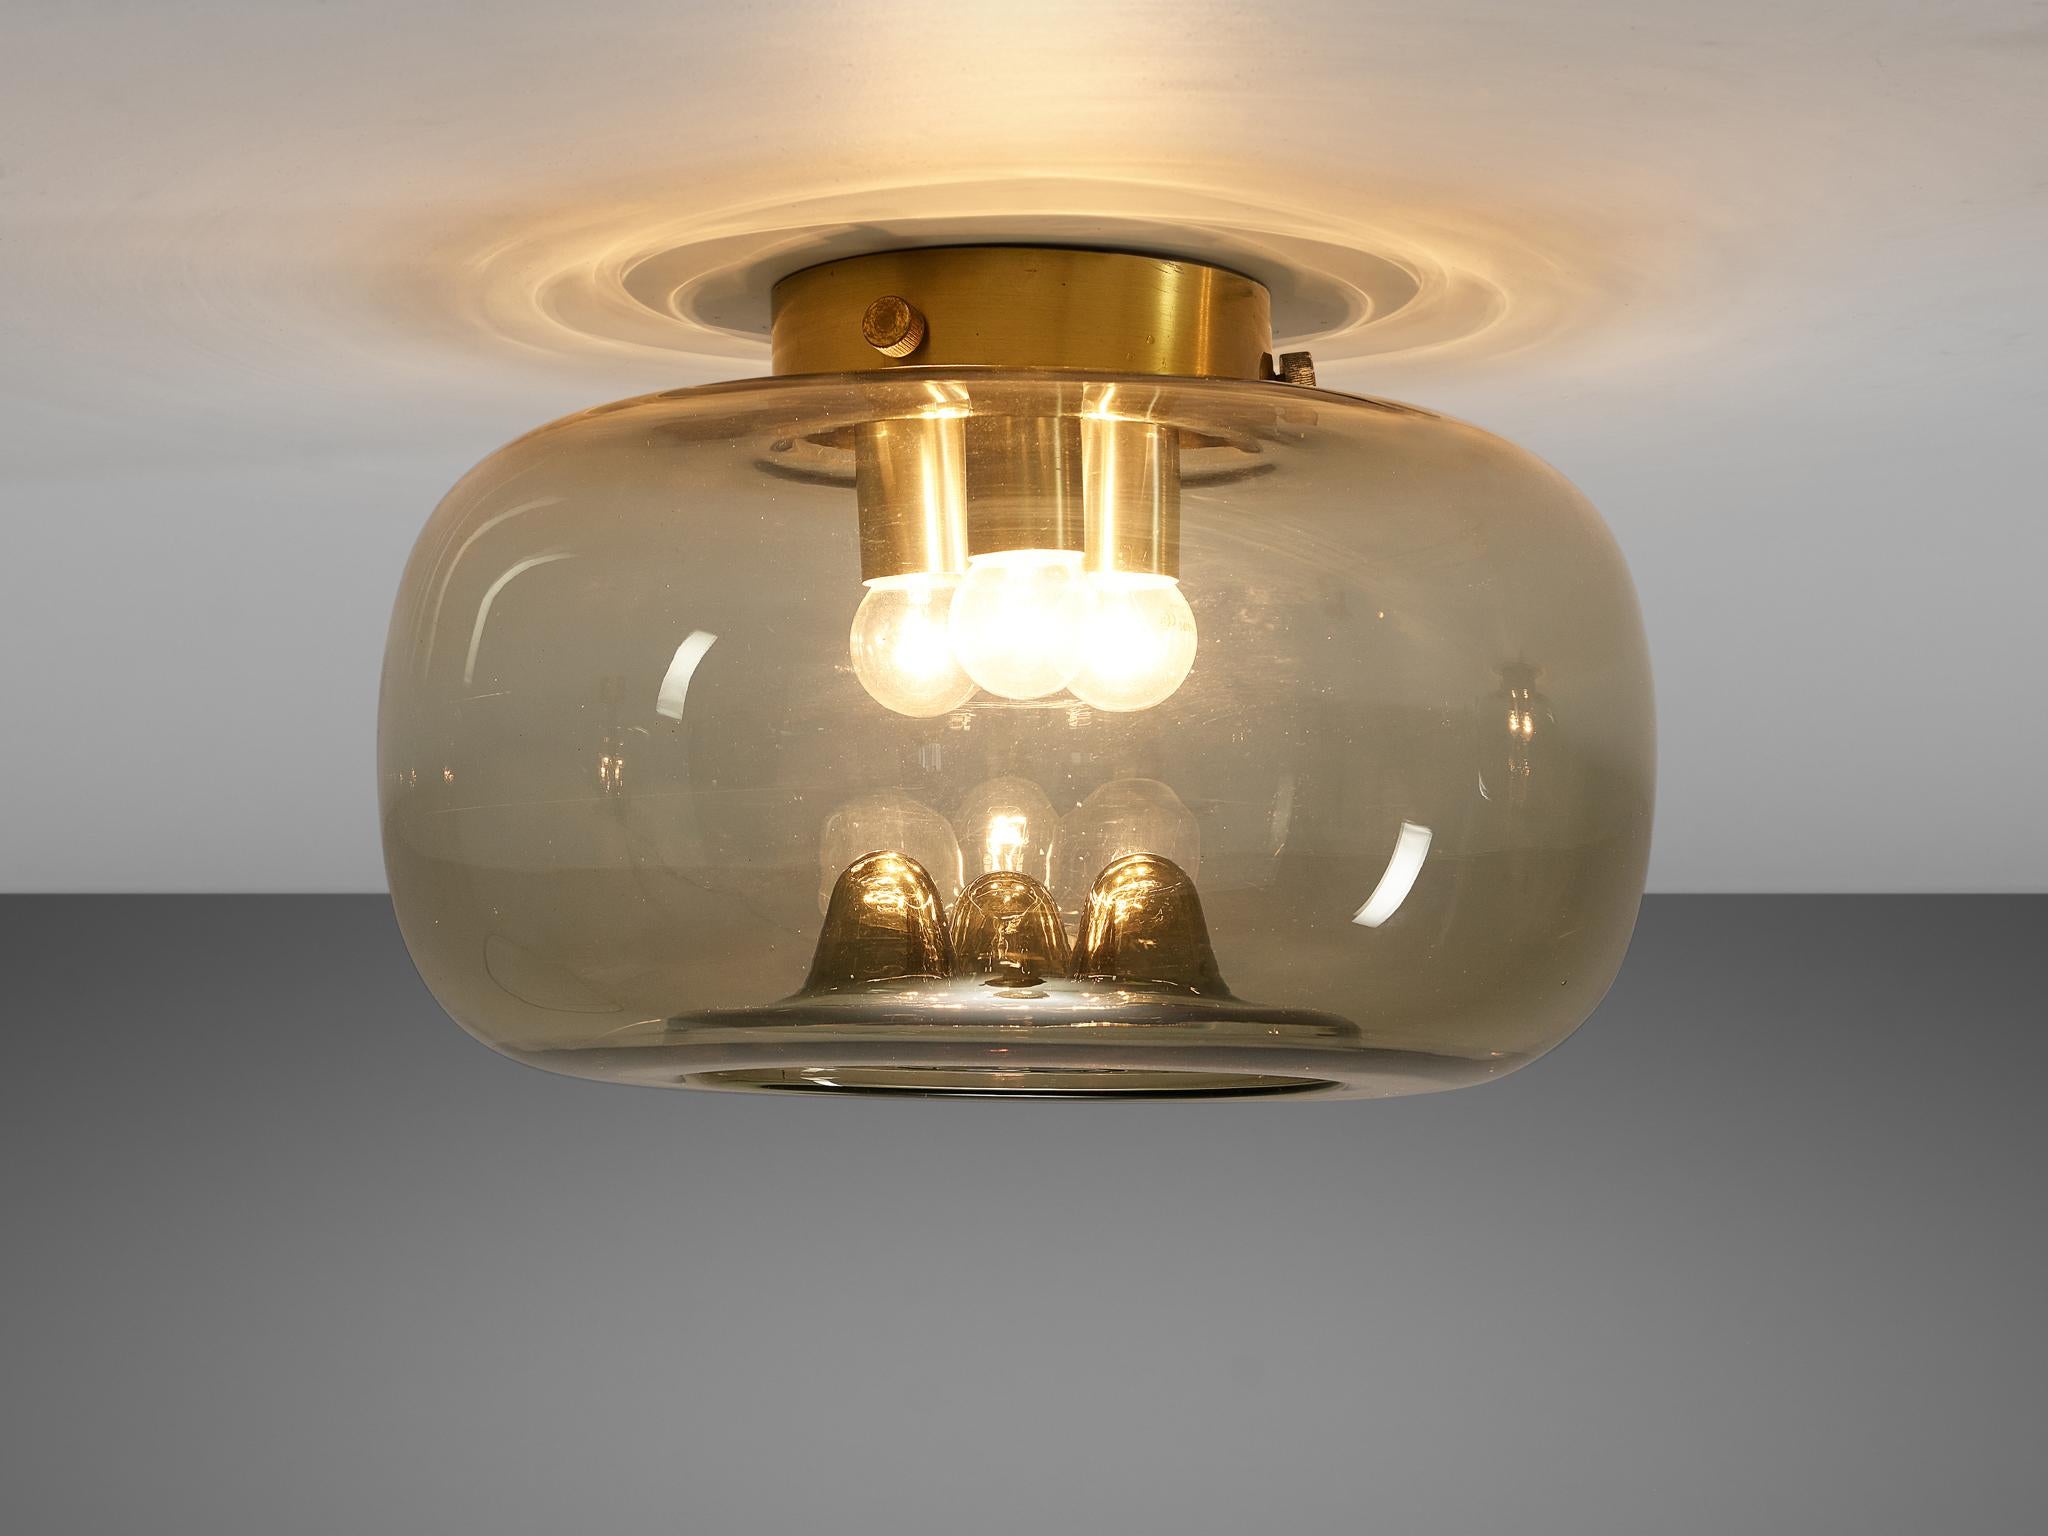 RAAK Amsterdam, Ceiling light, smoked glass, brass, the Netherlands, 1970s

Inside an oval glass shade are hold three small lightbulbs on brass cylindrical mountings by RAAK Amsterdam. The lightbulbs have an equivalent form in the bottom of the